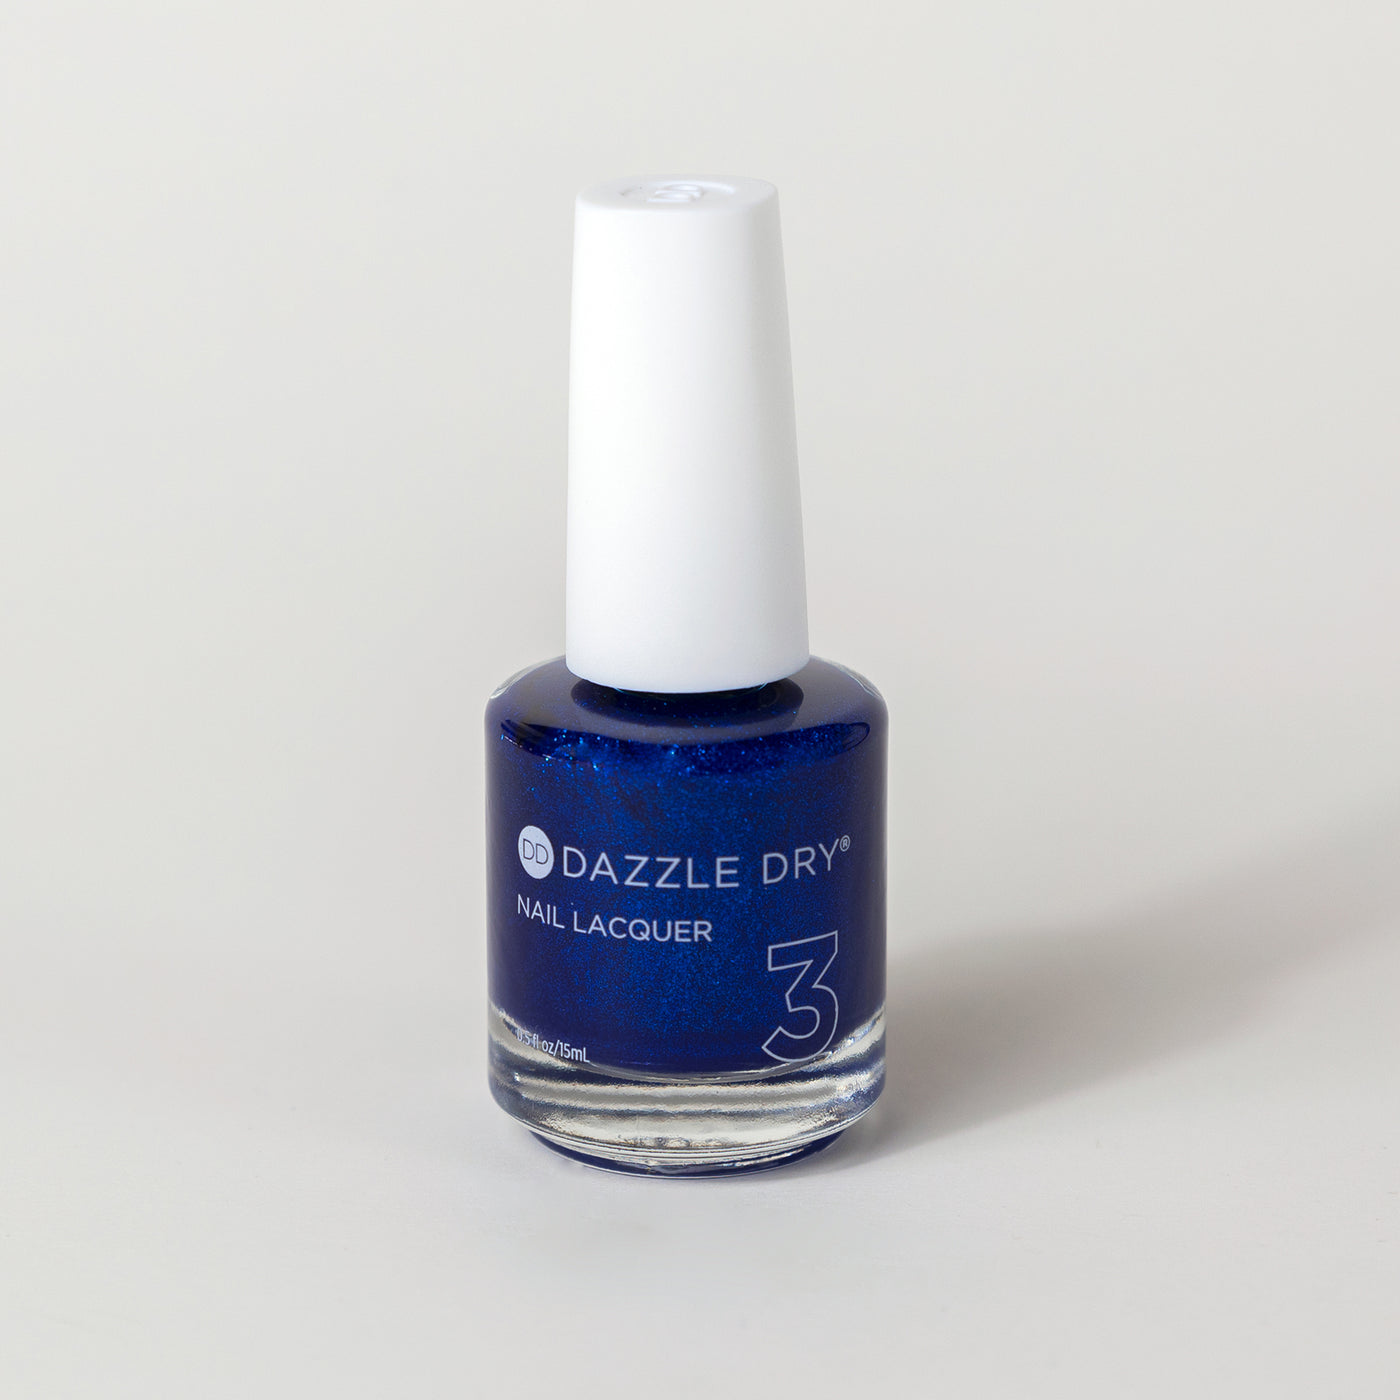 Justice – Dazzle Dry nail lacquer